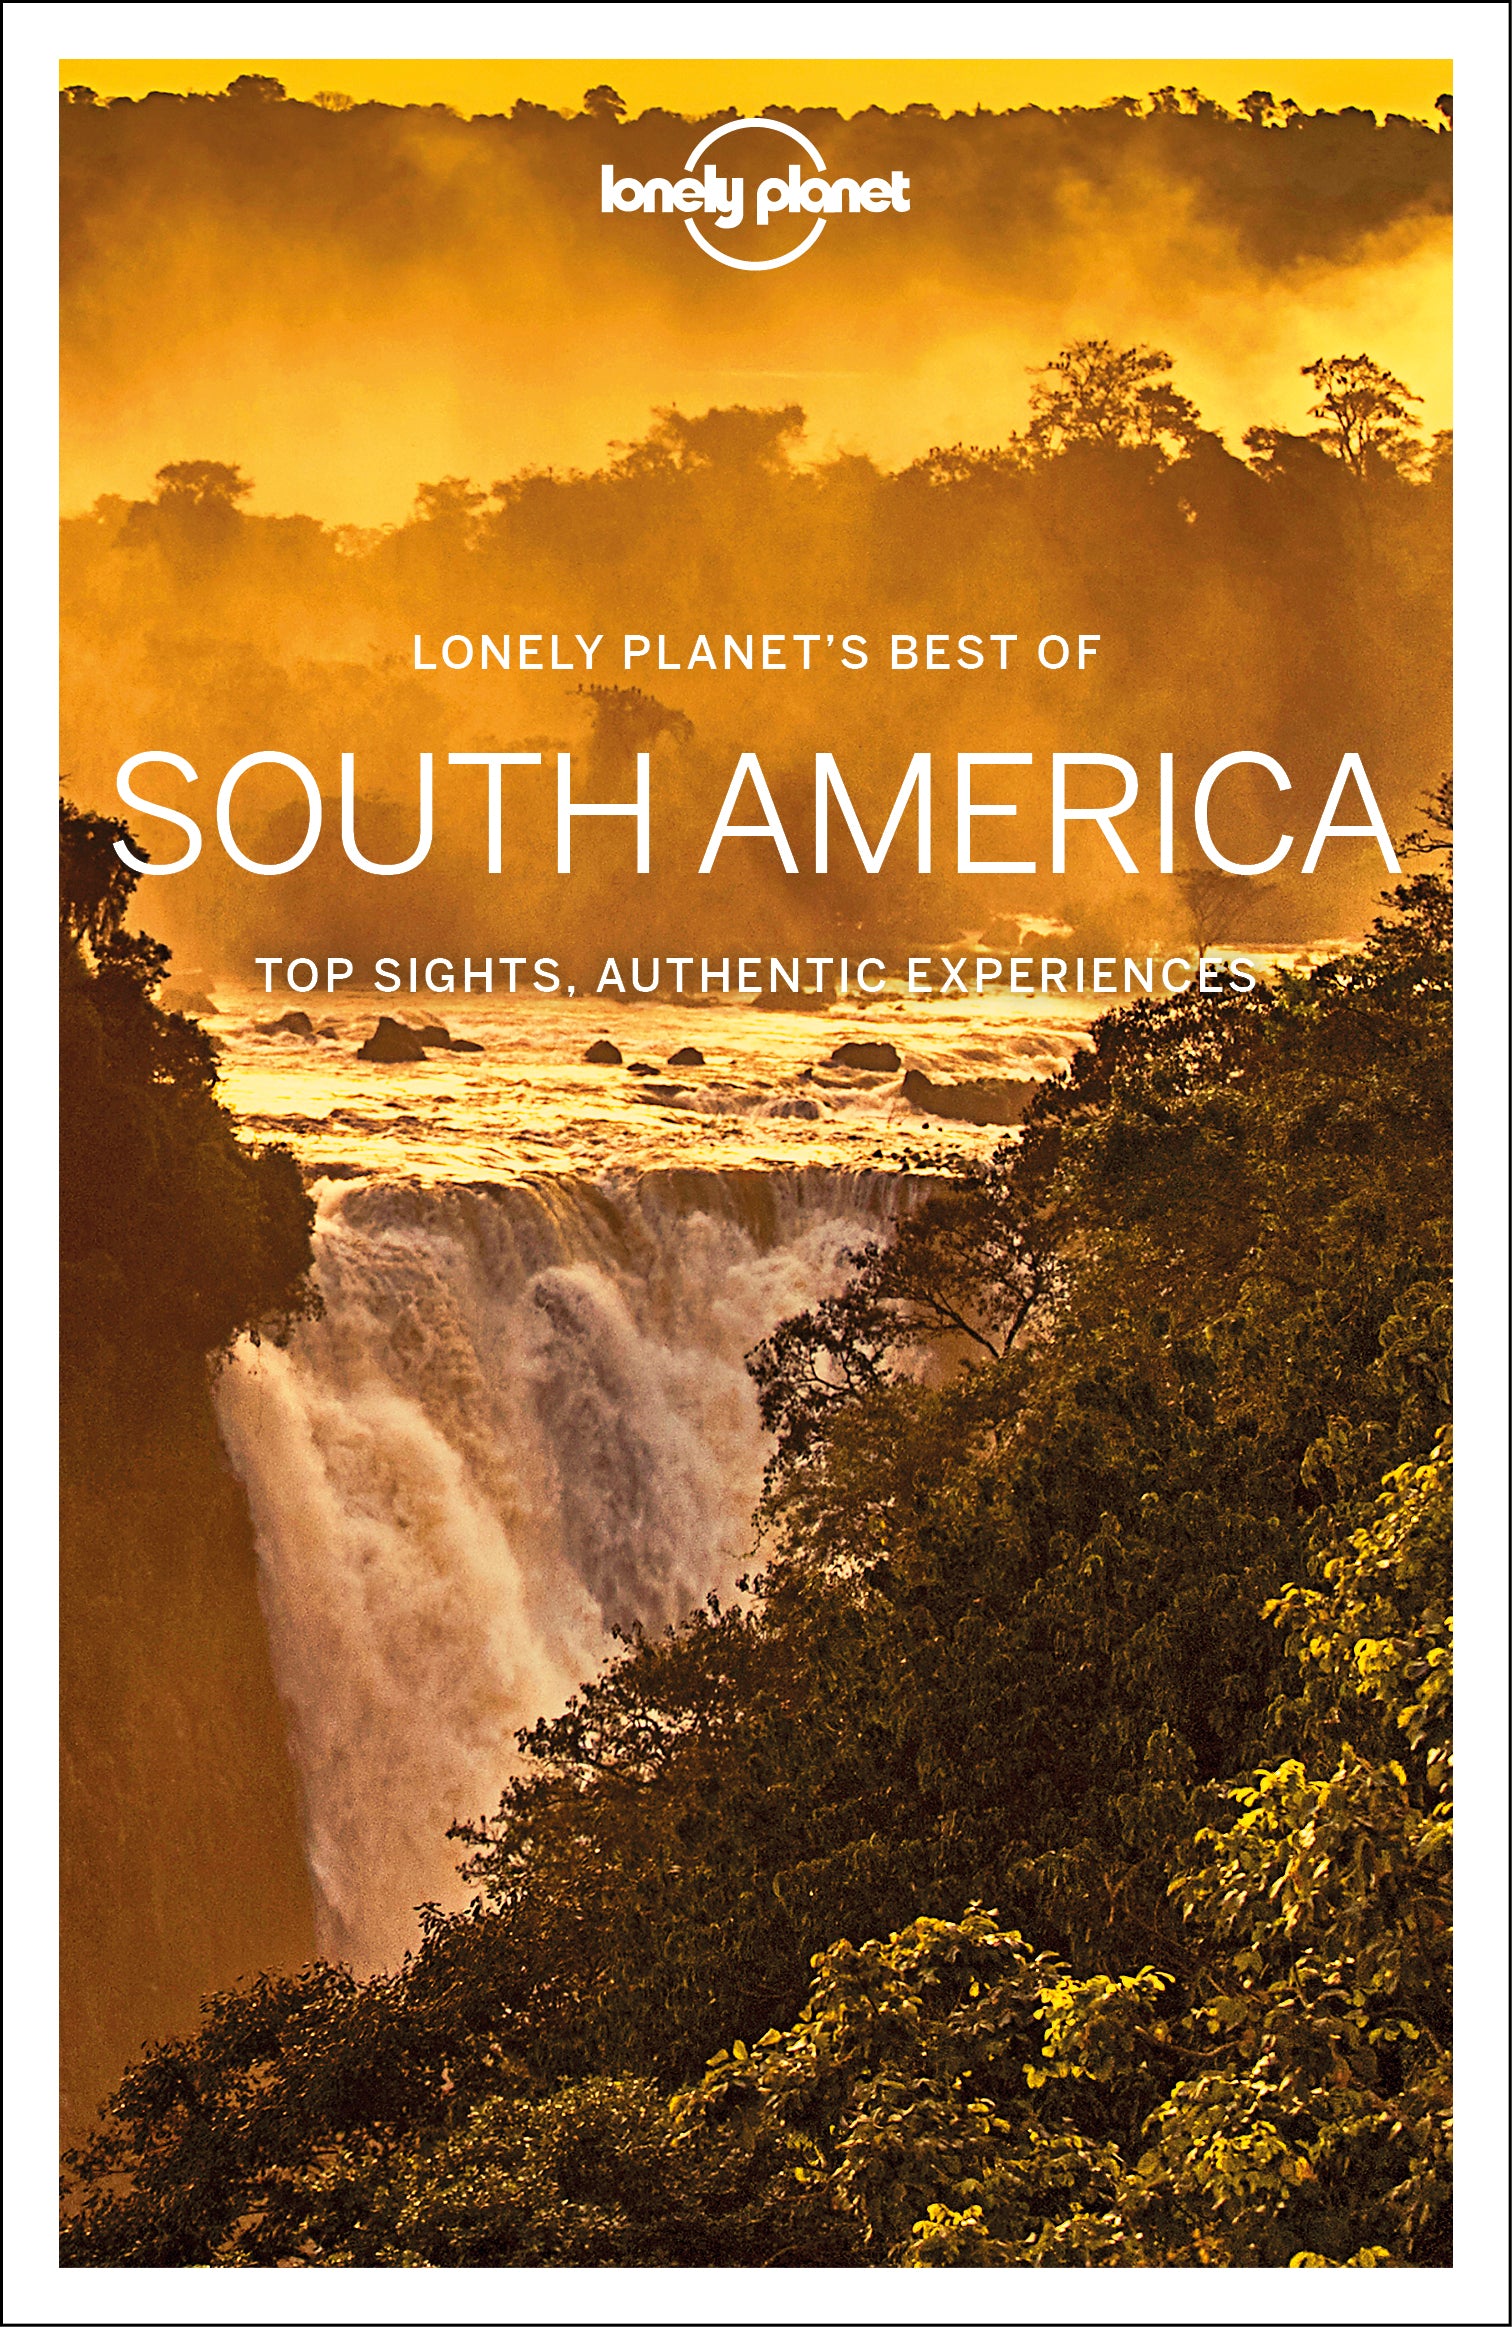 Martinique travel - Lonely Planet